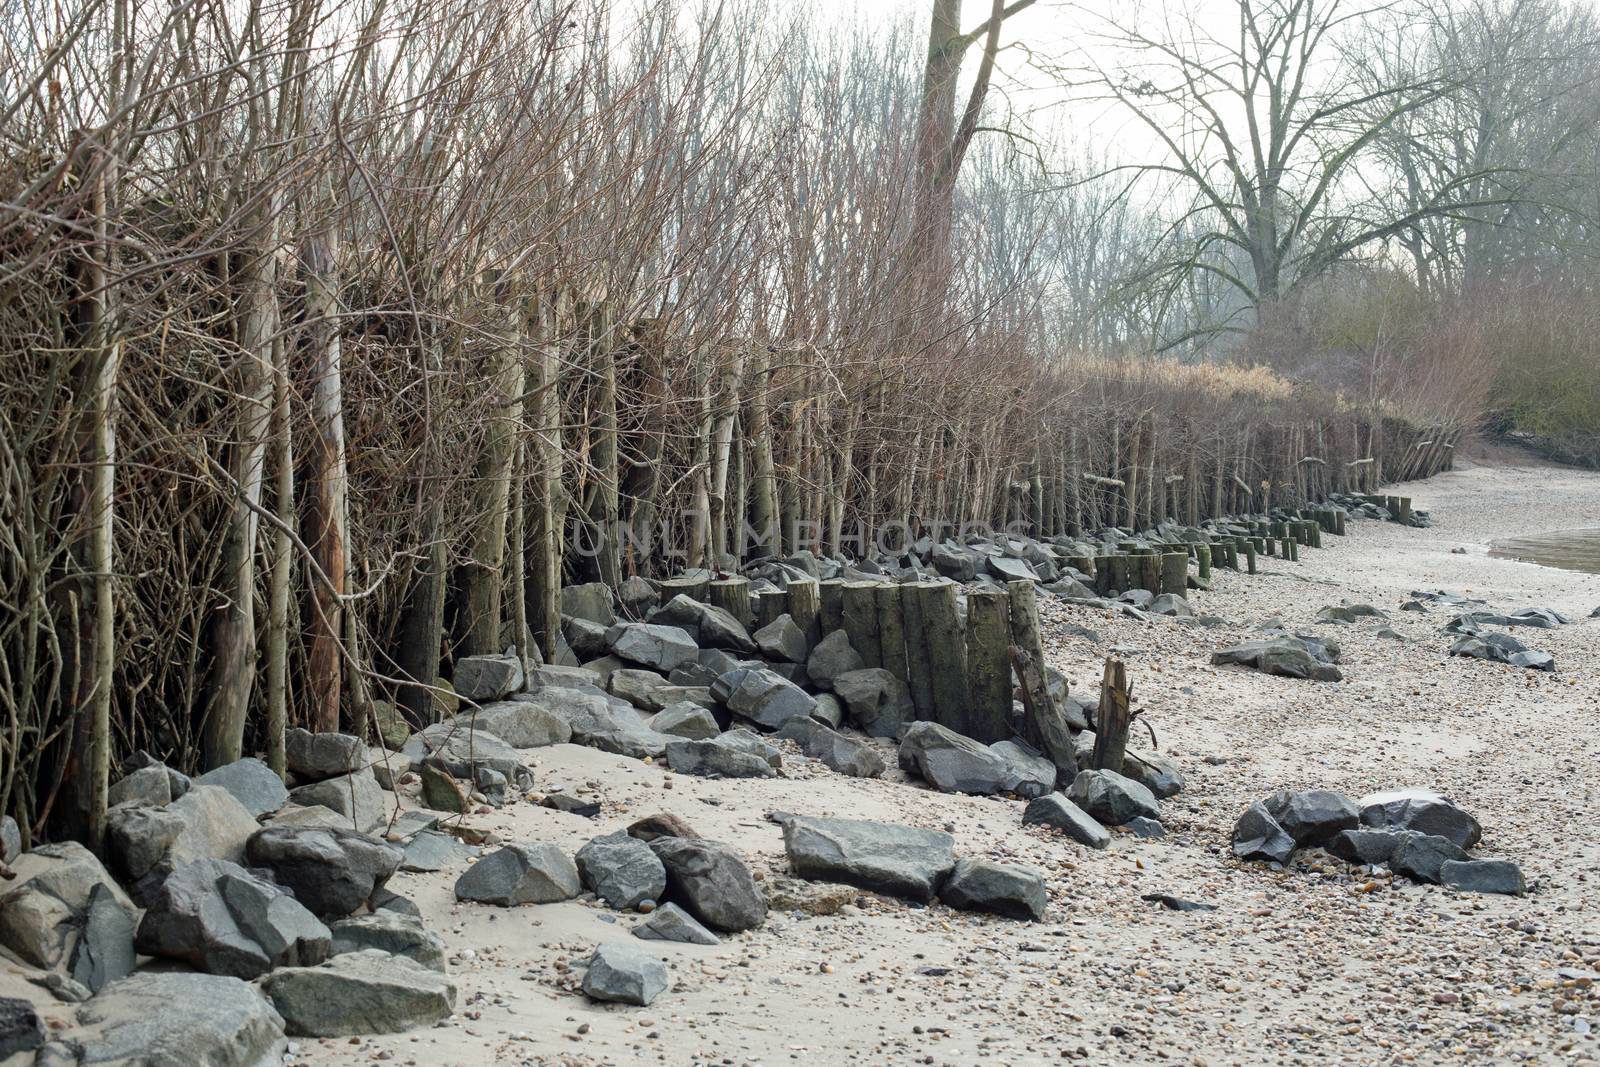 Flood protection at the shore of the rhine